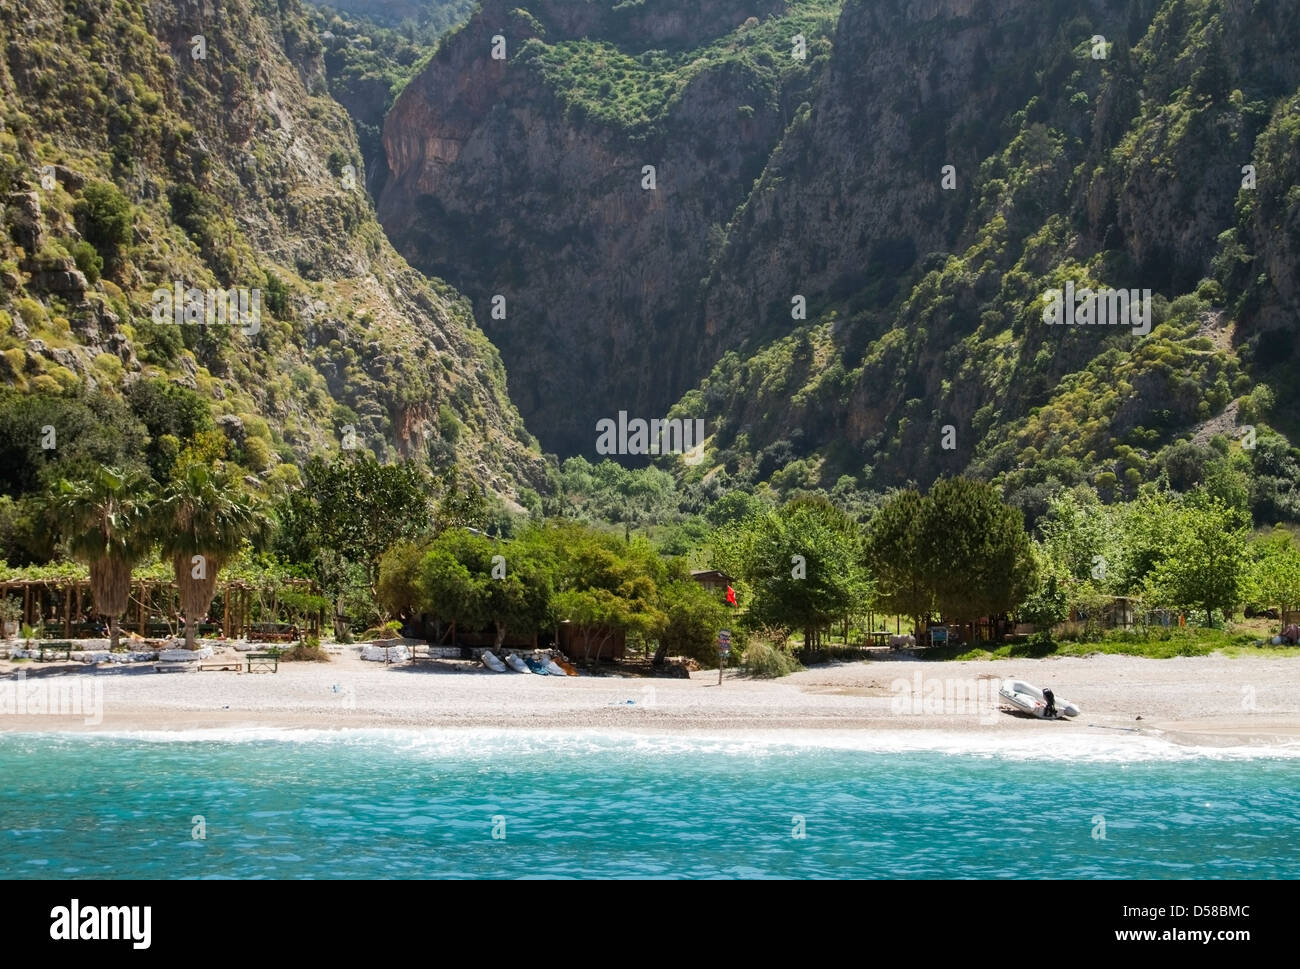 The isolated beach at Butterfly Valley on the turquoise coast, Turkey Stock Photo